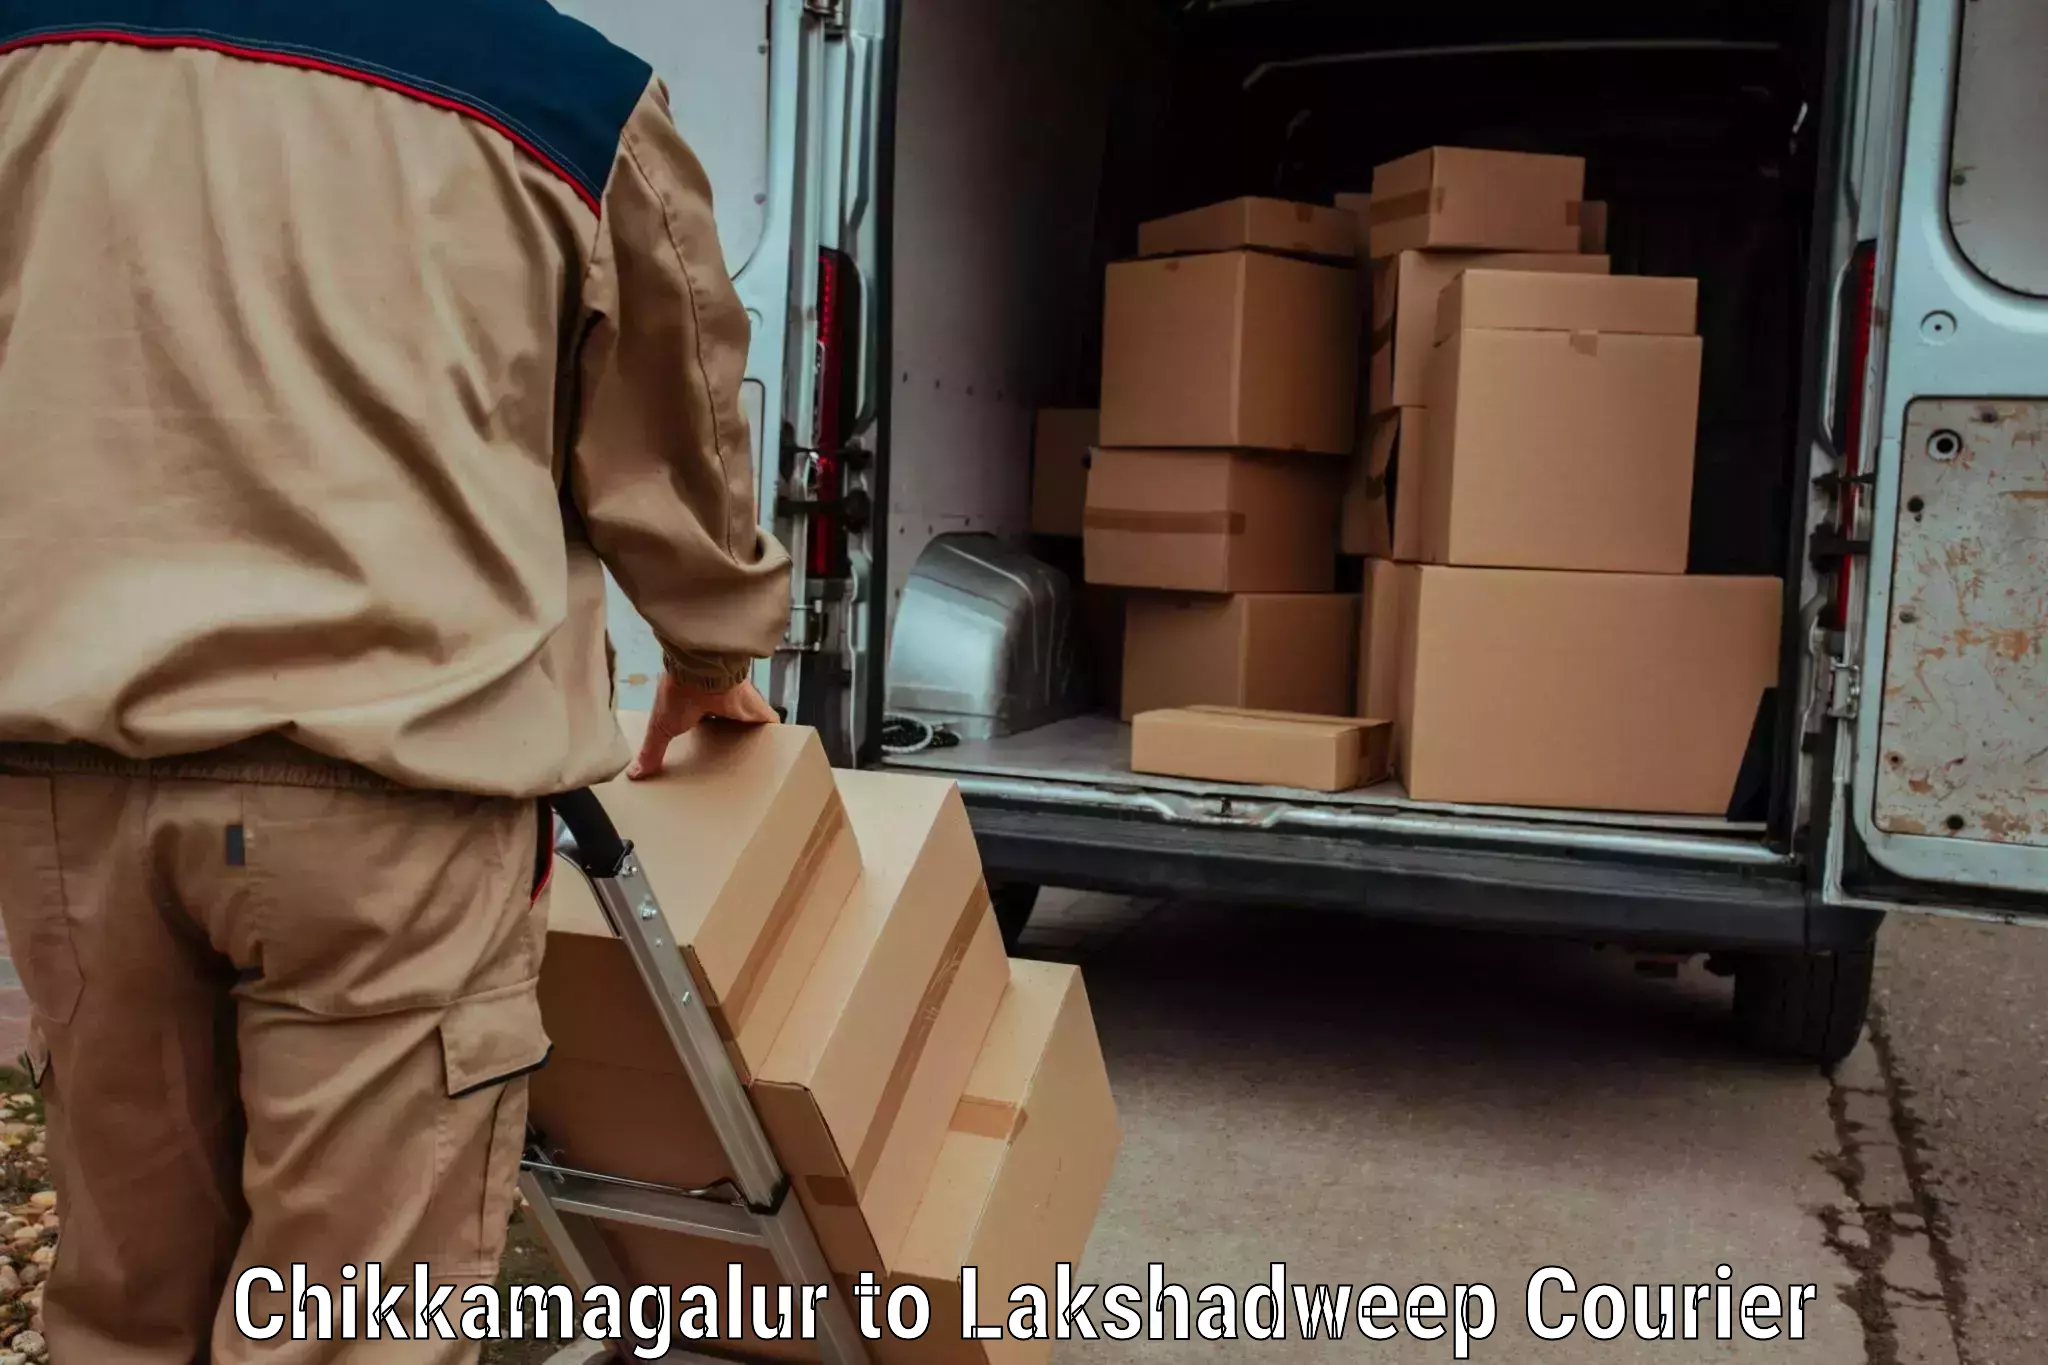 Holiday shipping services in Chikkamagalur to Lakshadweep